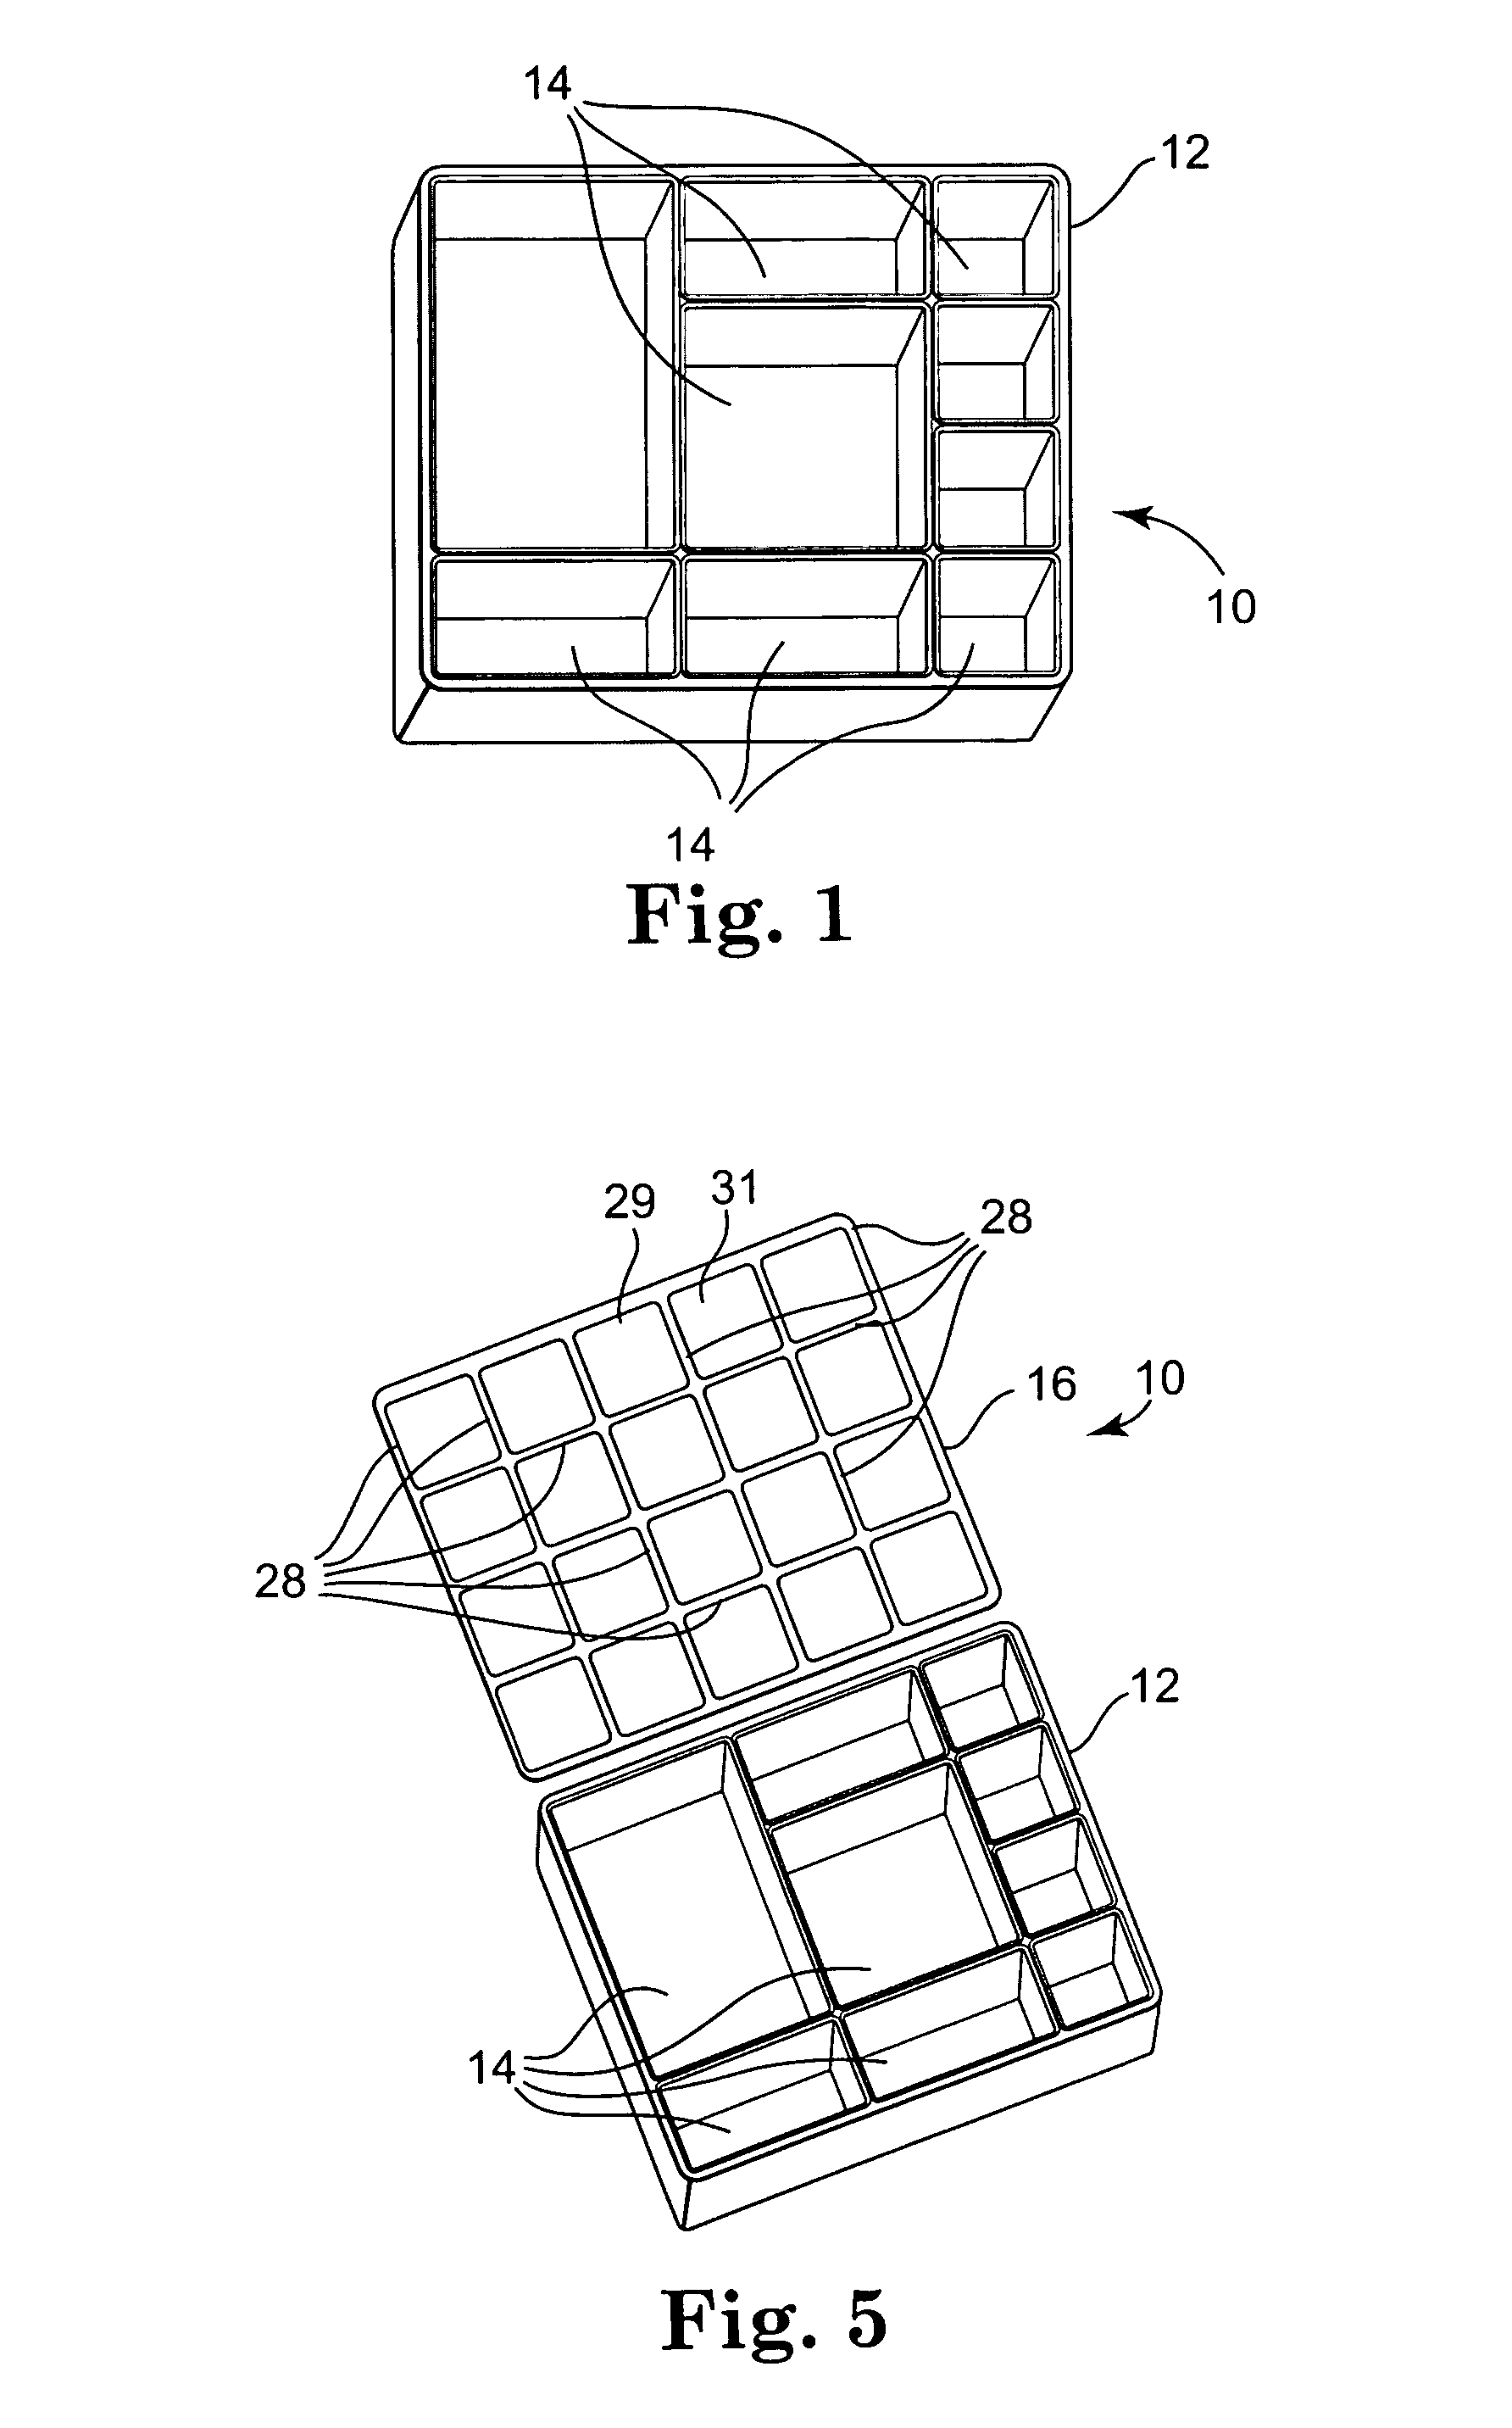 Multi-compartment container and lid assembly